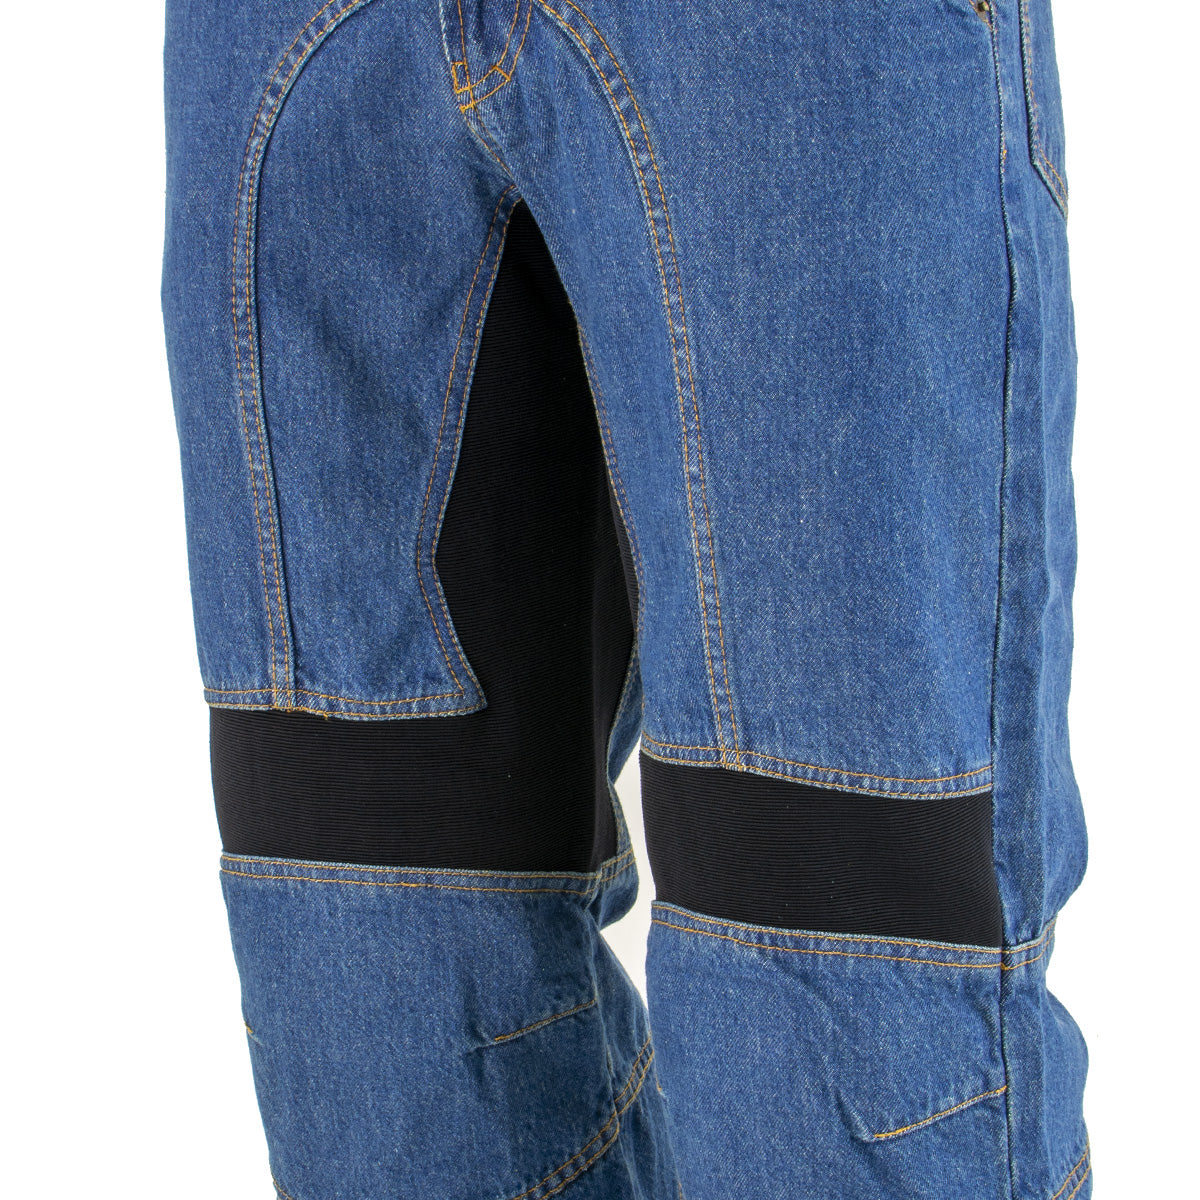 Xelement 055029 Men's Classic Fit Blue Denim Motorcycle Racing Pants with X-Armor Protection